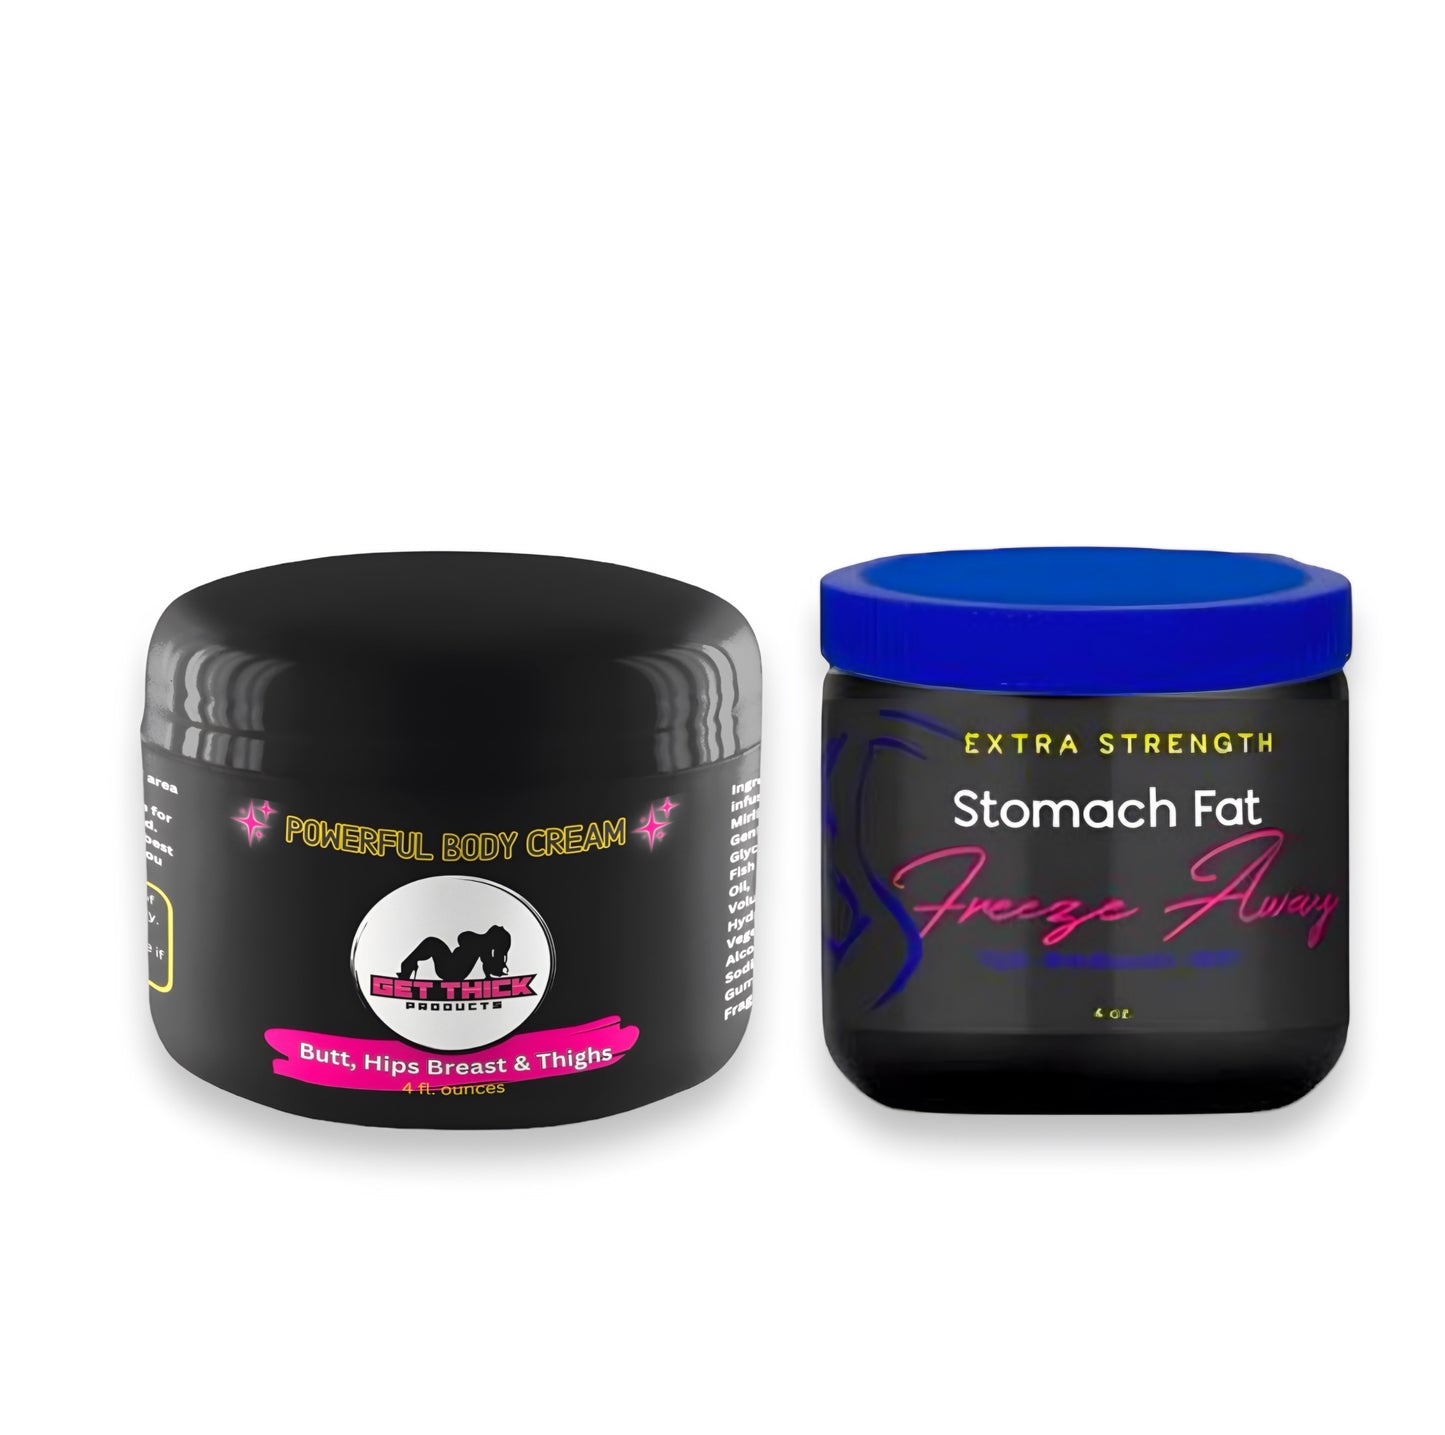 Get Thick Products - Cream & Simming Gel Slimthick 4oz Set